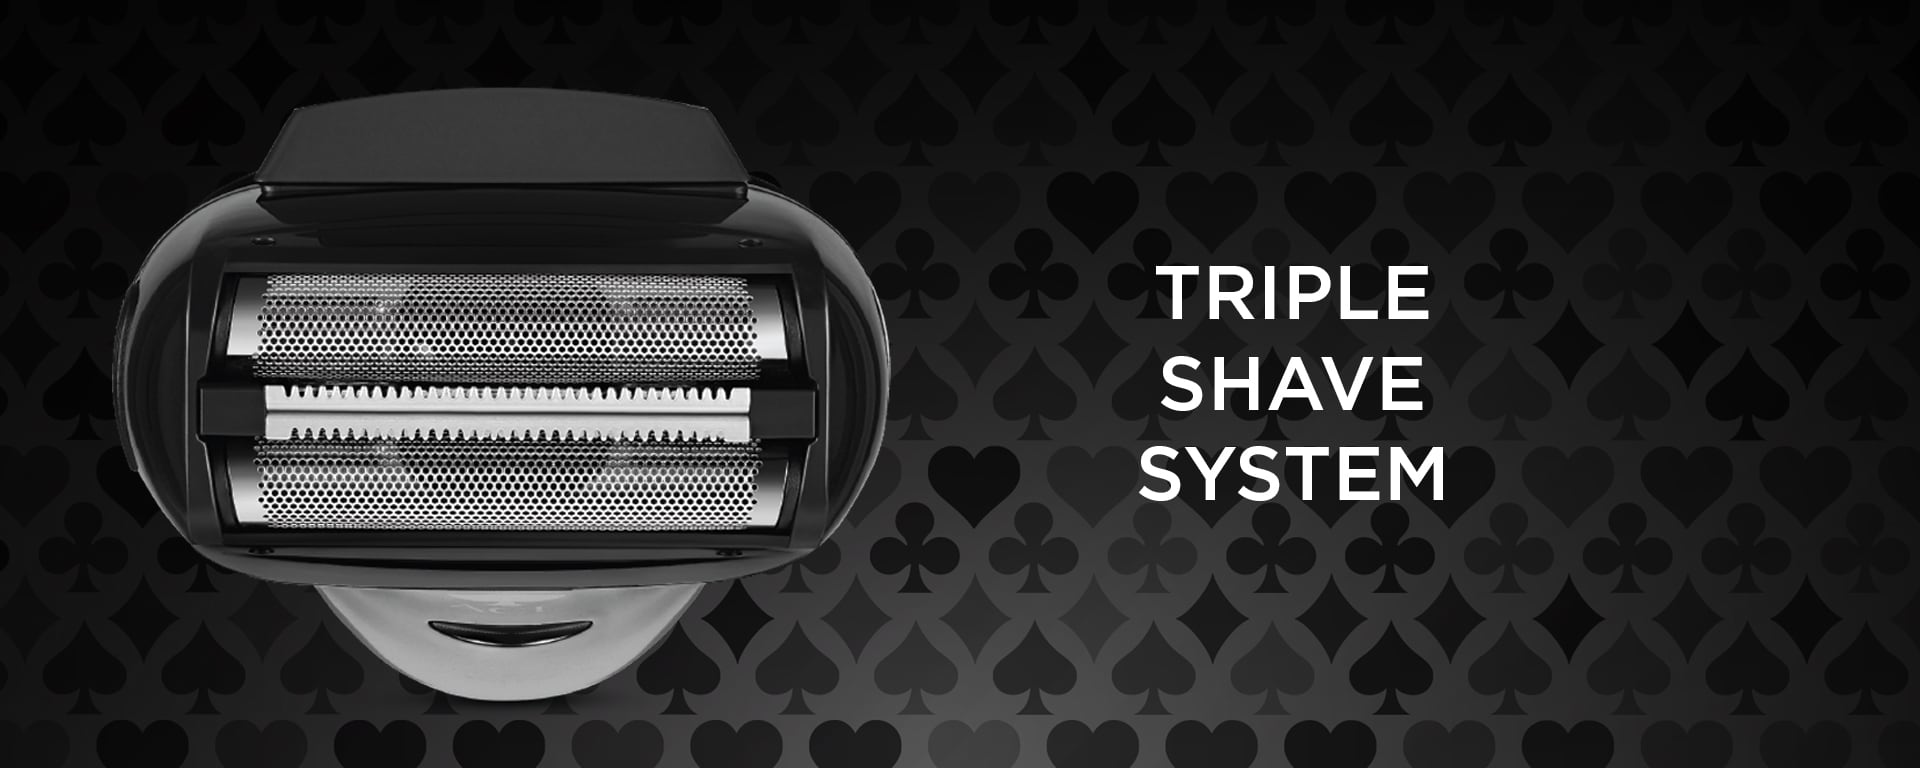 triple+shave+system+close+shave+best+shaver+gamma+professional